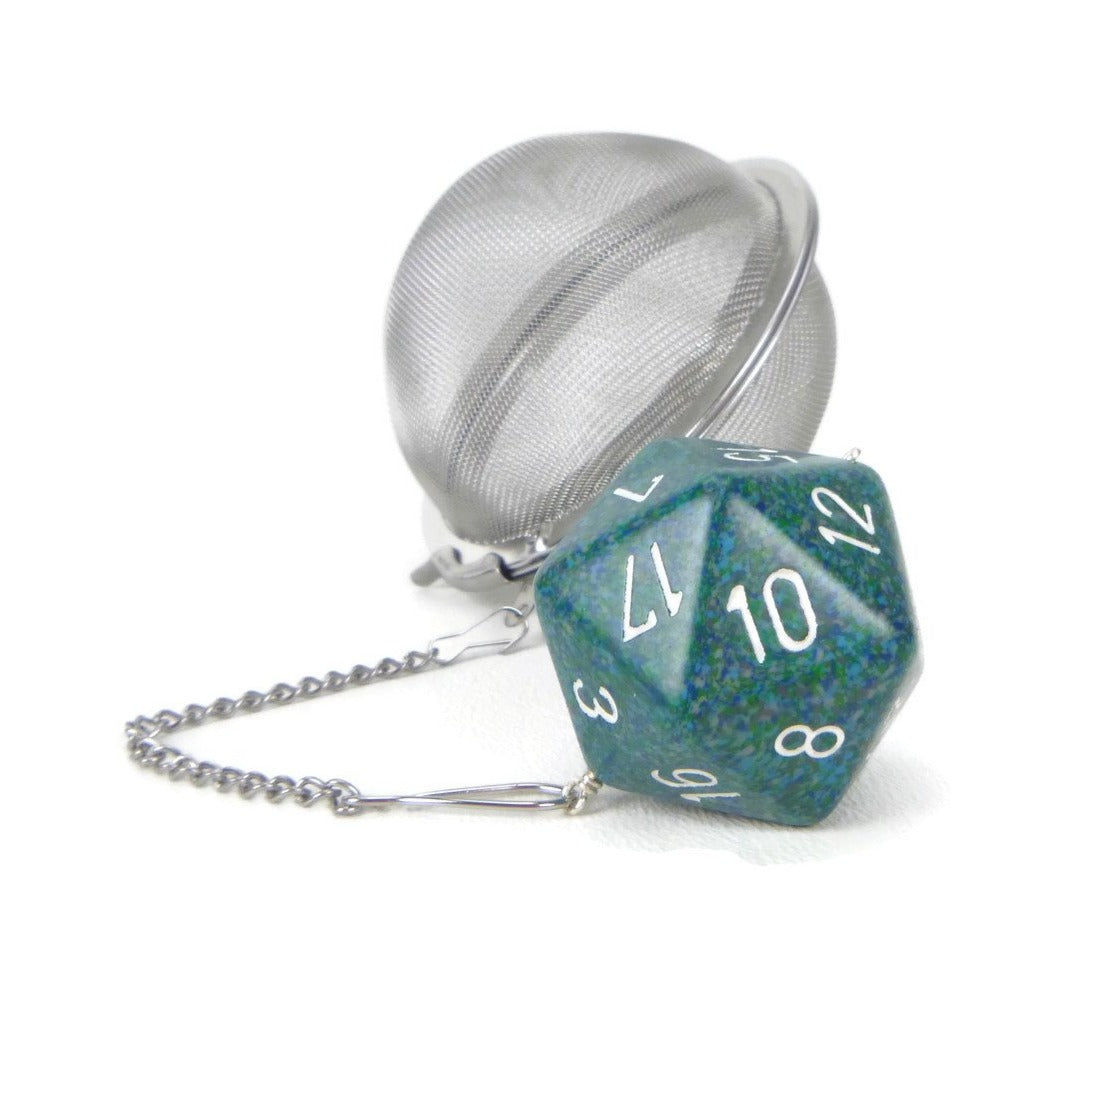 3 Inch Tea Infuser Ball with Large d20 - Sea Blue